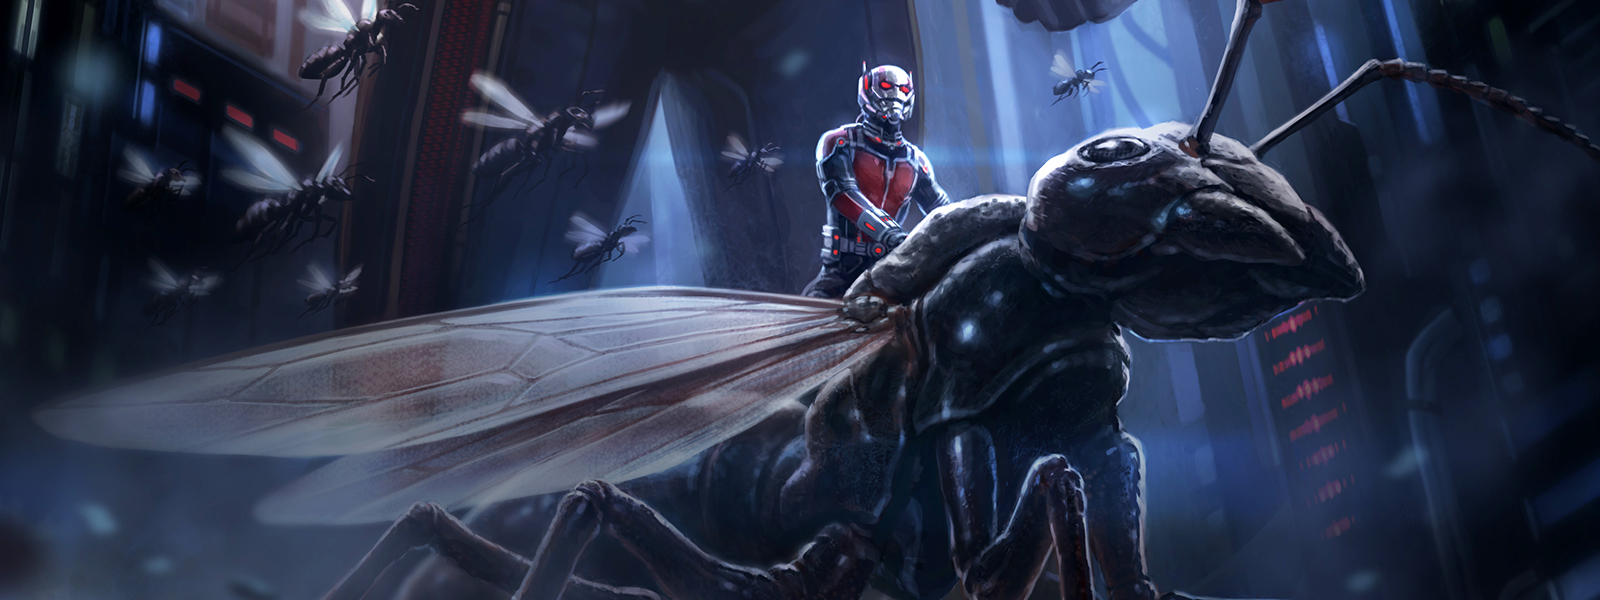 Marvel’s Ant-Man first trailer